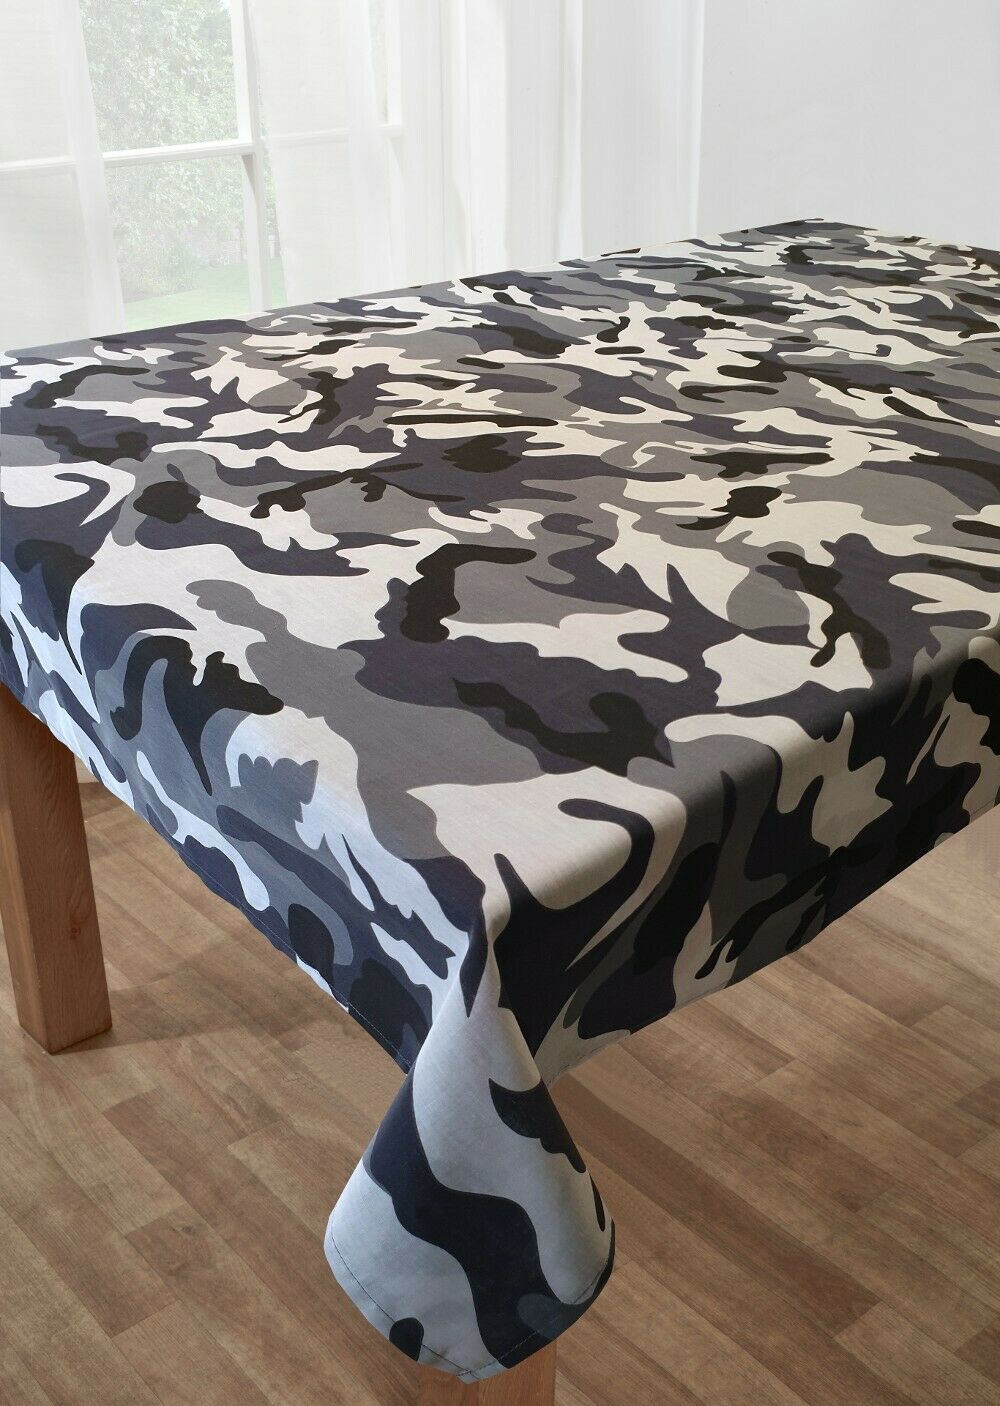 Camouflage Black White Grey Table Cloths